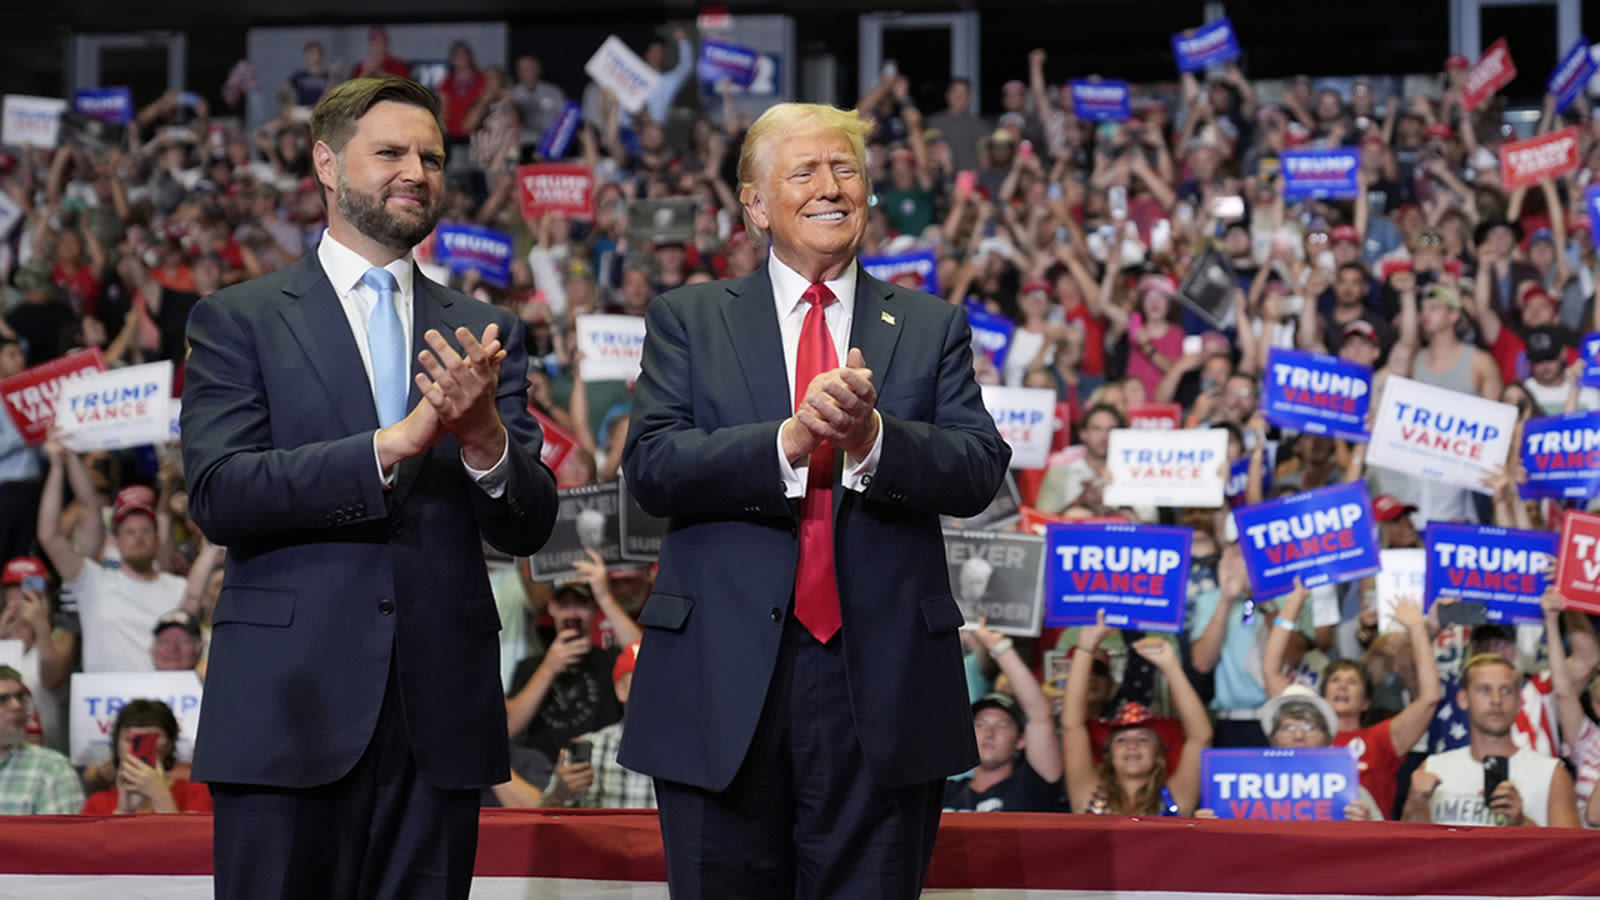 Donald Trump, JD Vance hit campaign trail for 1st time together at campaign rally in Michigan